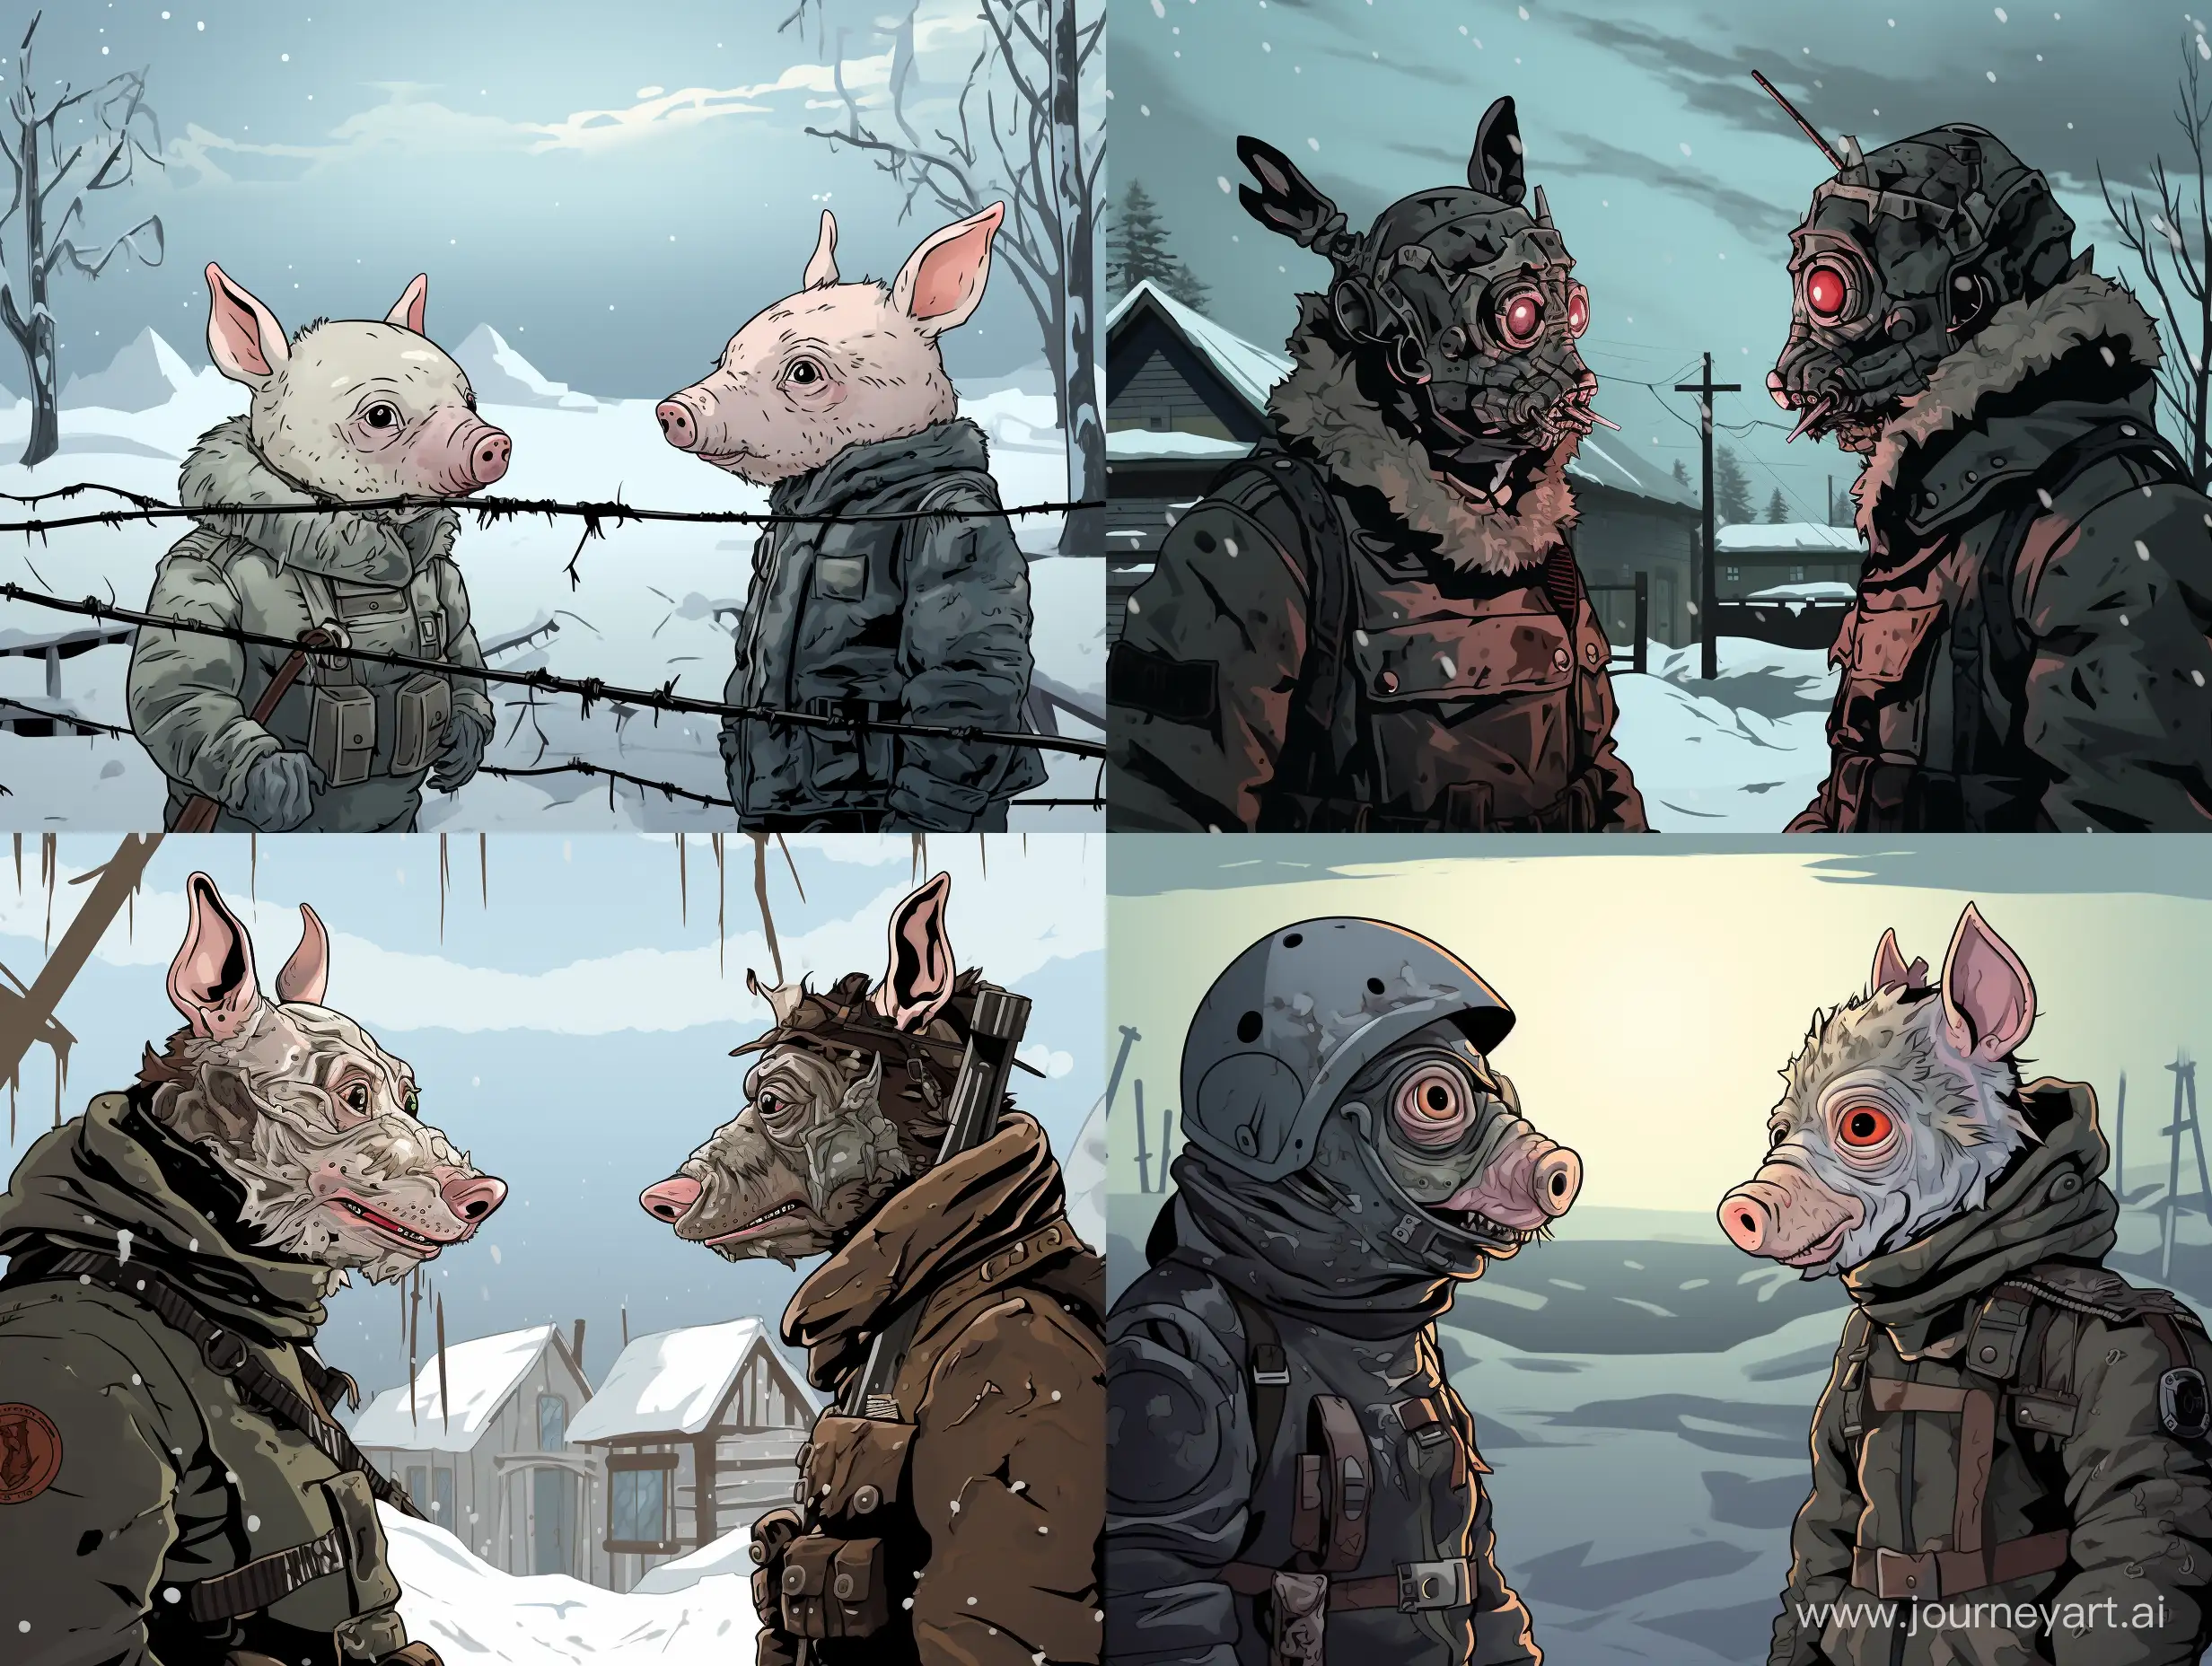 Animated-War-Pigs-in-Frozen-Trenches-Conversations-Amidst-Desolation